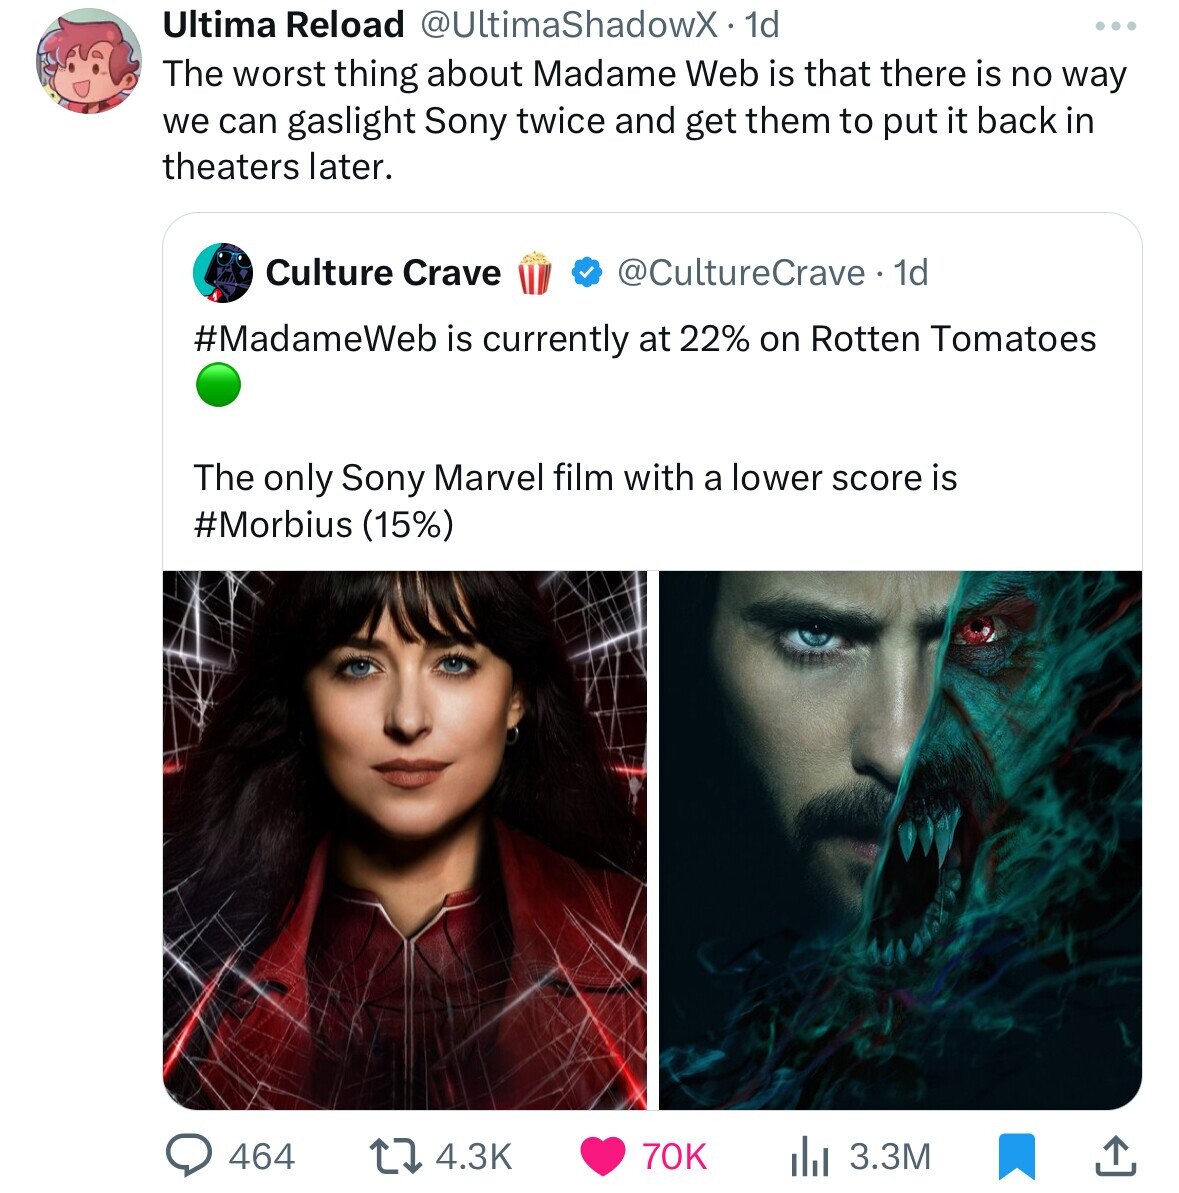 media - Ultima Reload . 1d The worst thing about Madame Web is that there is no way we can gaslight Sony twice and get them to put it back in theaters later. Culture Crave . 1d is currently at 22% on Rotten Tomatoes The only Sony Marvel film with a lower 